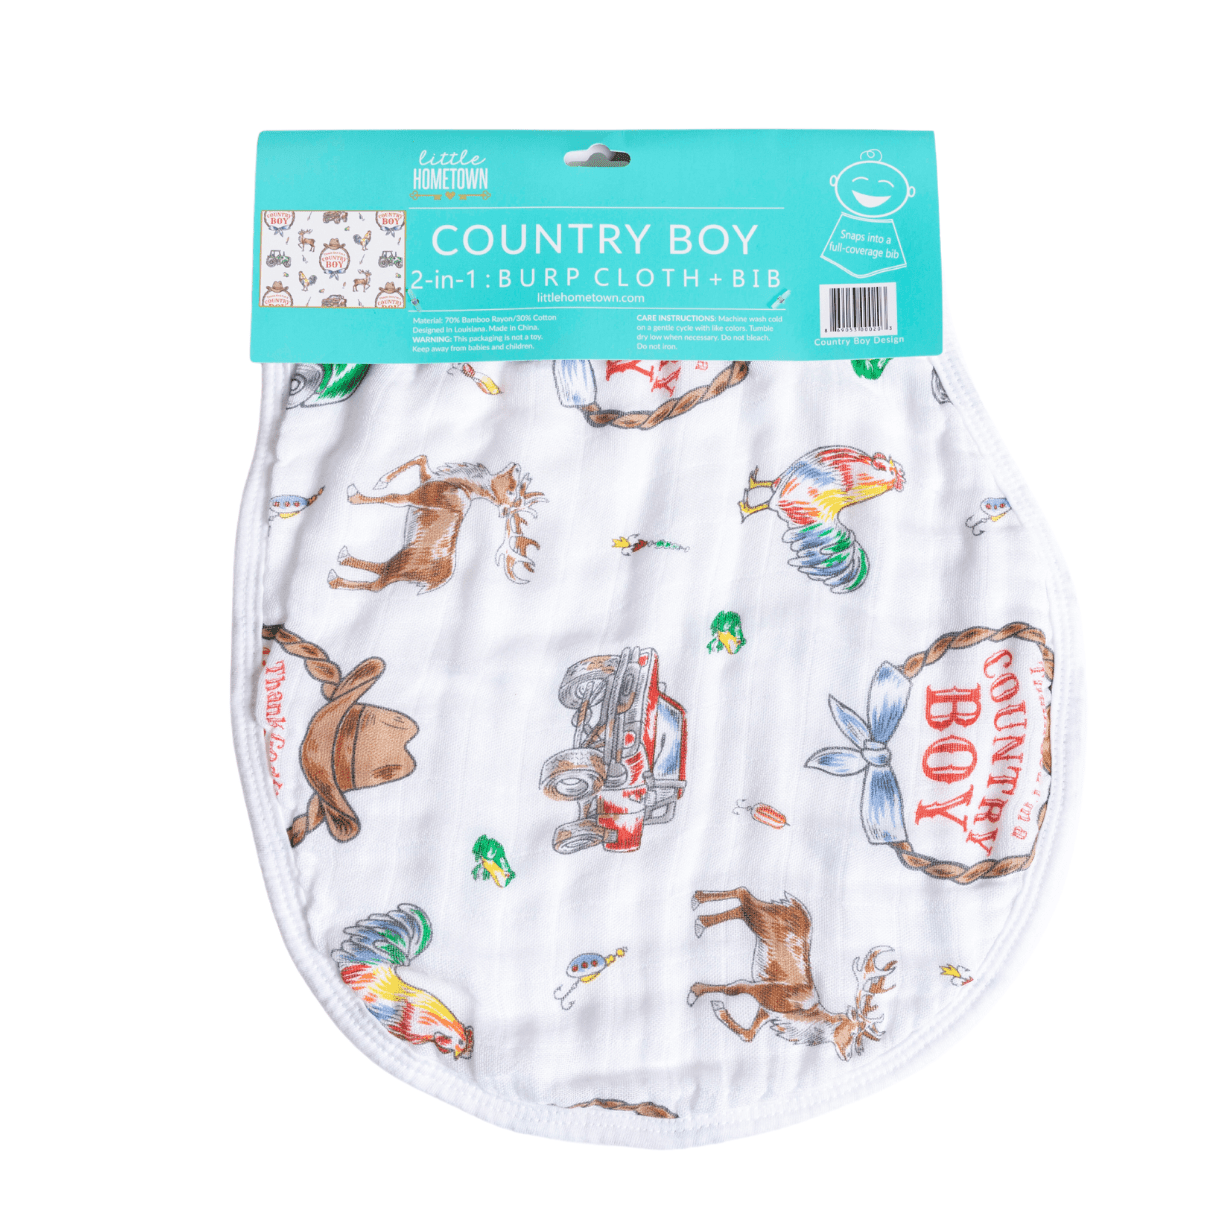 Country Boy 2-in-1 burp cloth and bib combo with blue plaid and tractor design, perfect for baby boys.